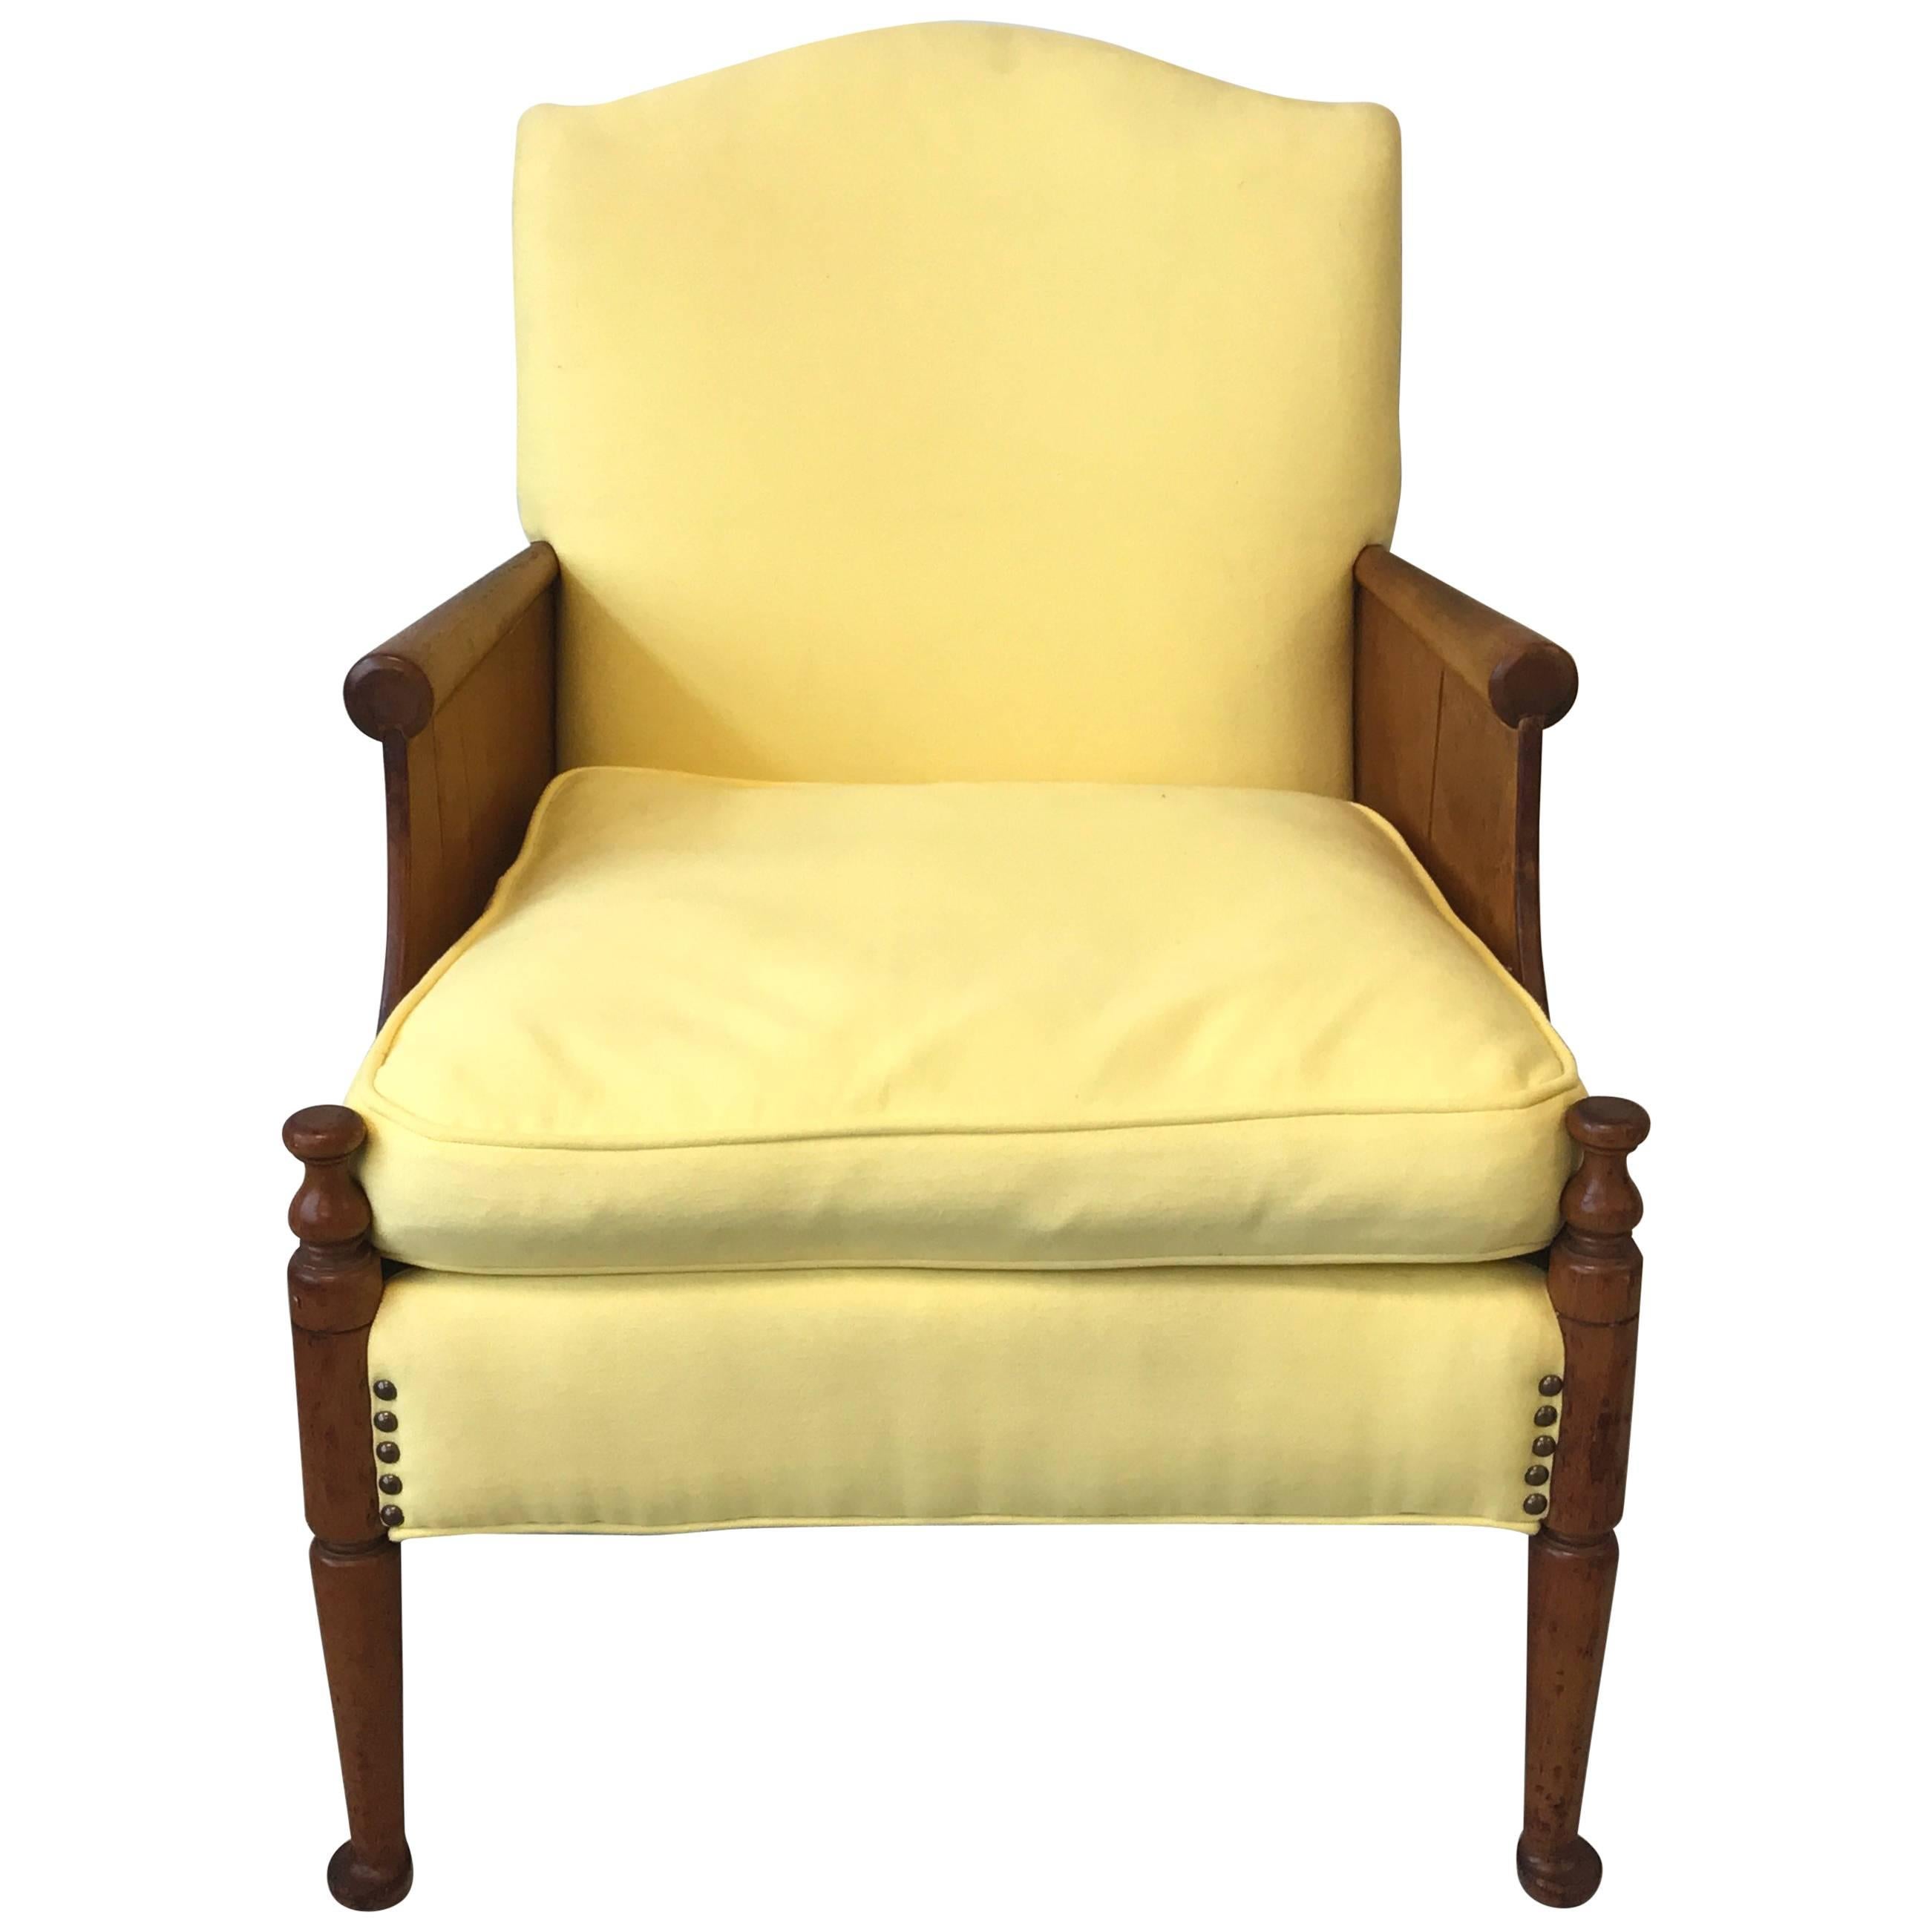 1940s French Oak Side Chair with Yellow Upholstery